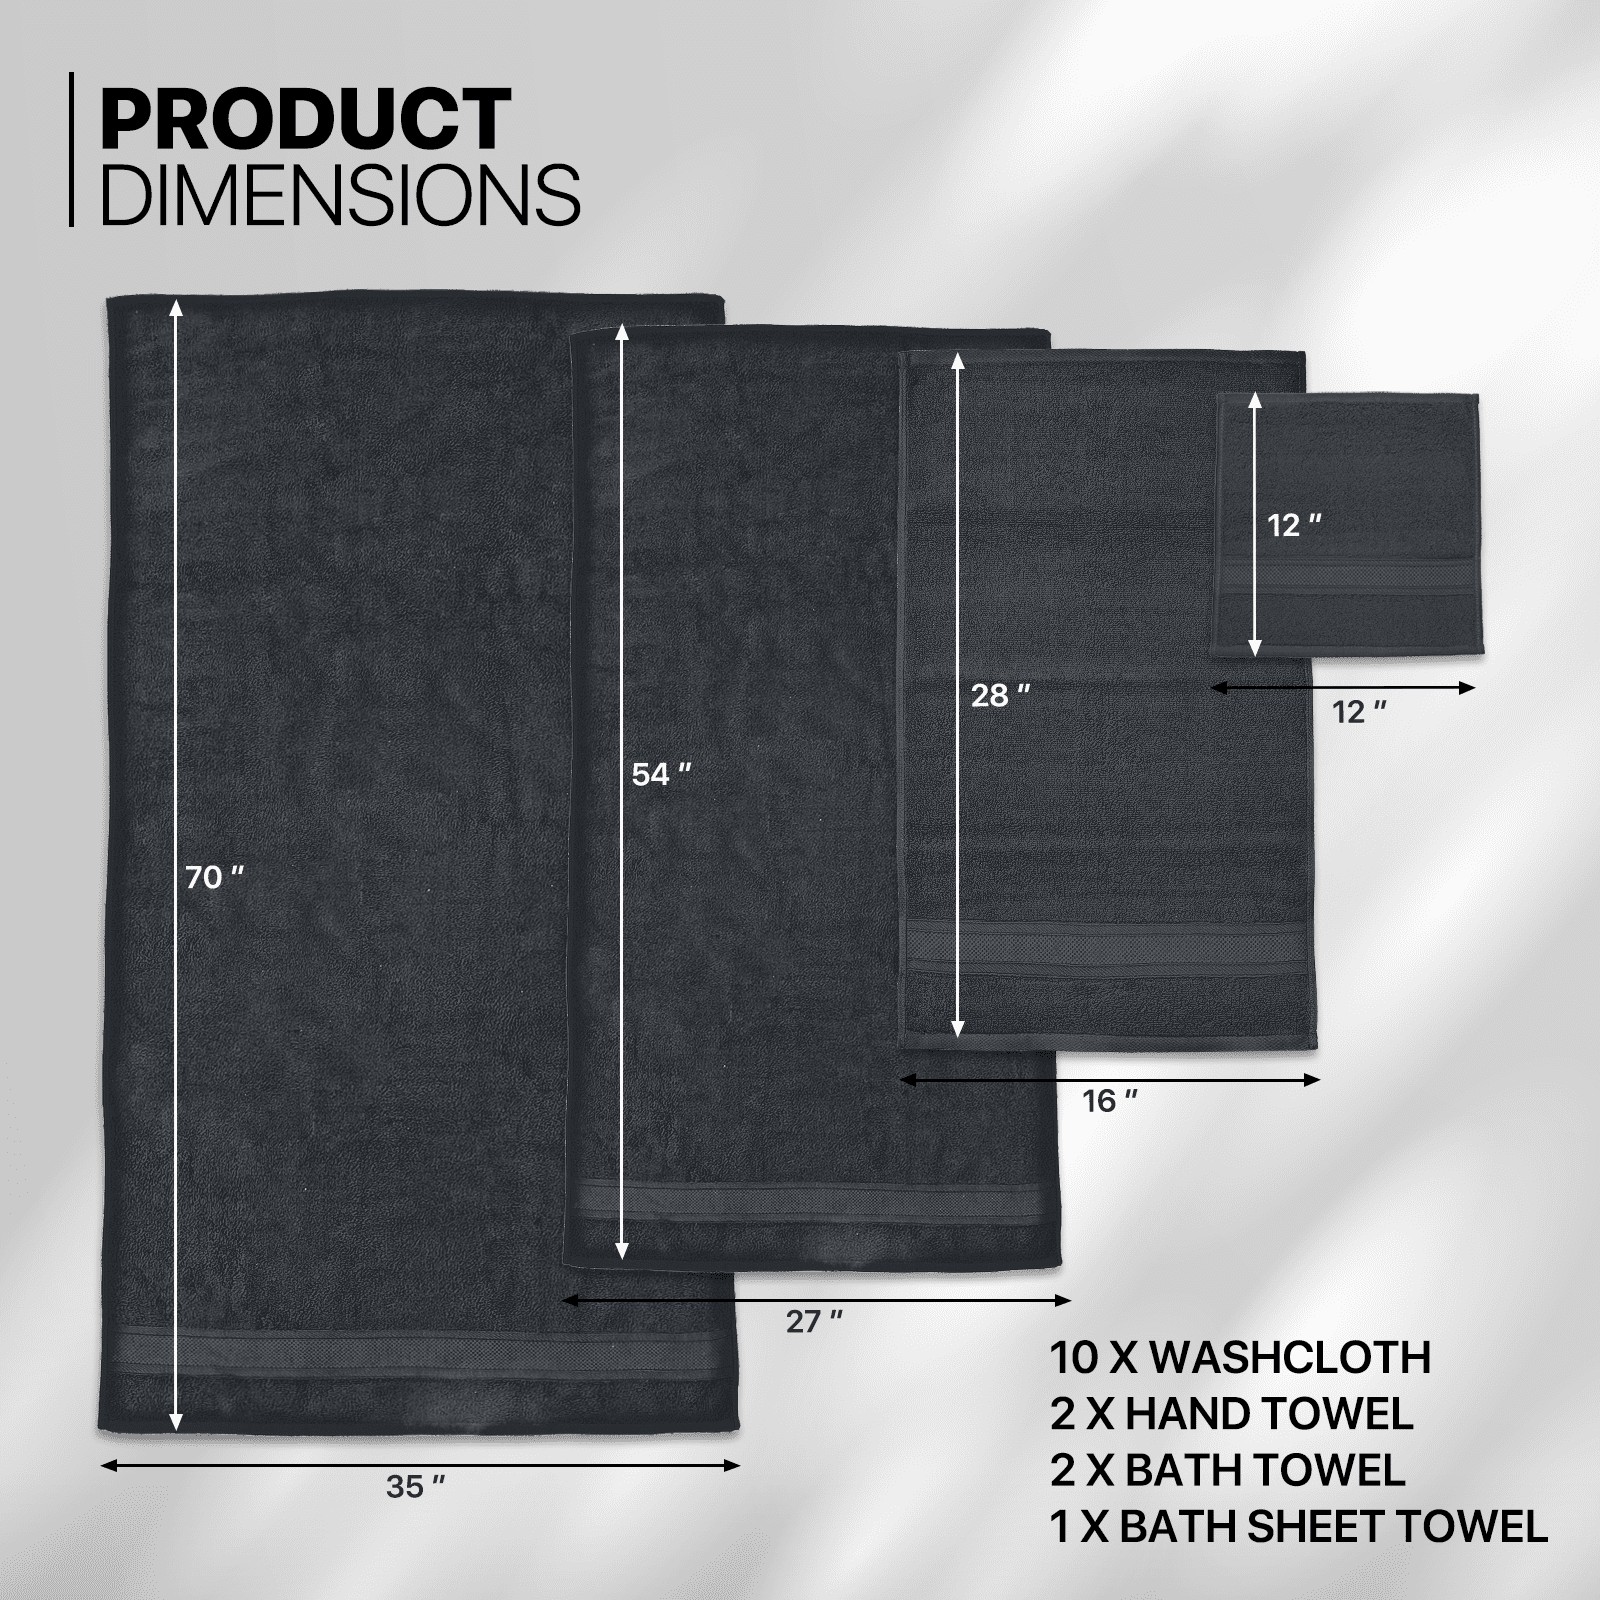 Belizzi Home 8 Piece Towel Set 100% Ring Spun Cotton, 2 Bath Towels 27x54,  2 Hand Towels 16x28 and 4 Washcloths 13x13 - Ultra Soft Highly Absorbent  Machine Washable Hotel Spa Quality - Black